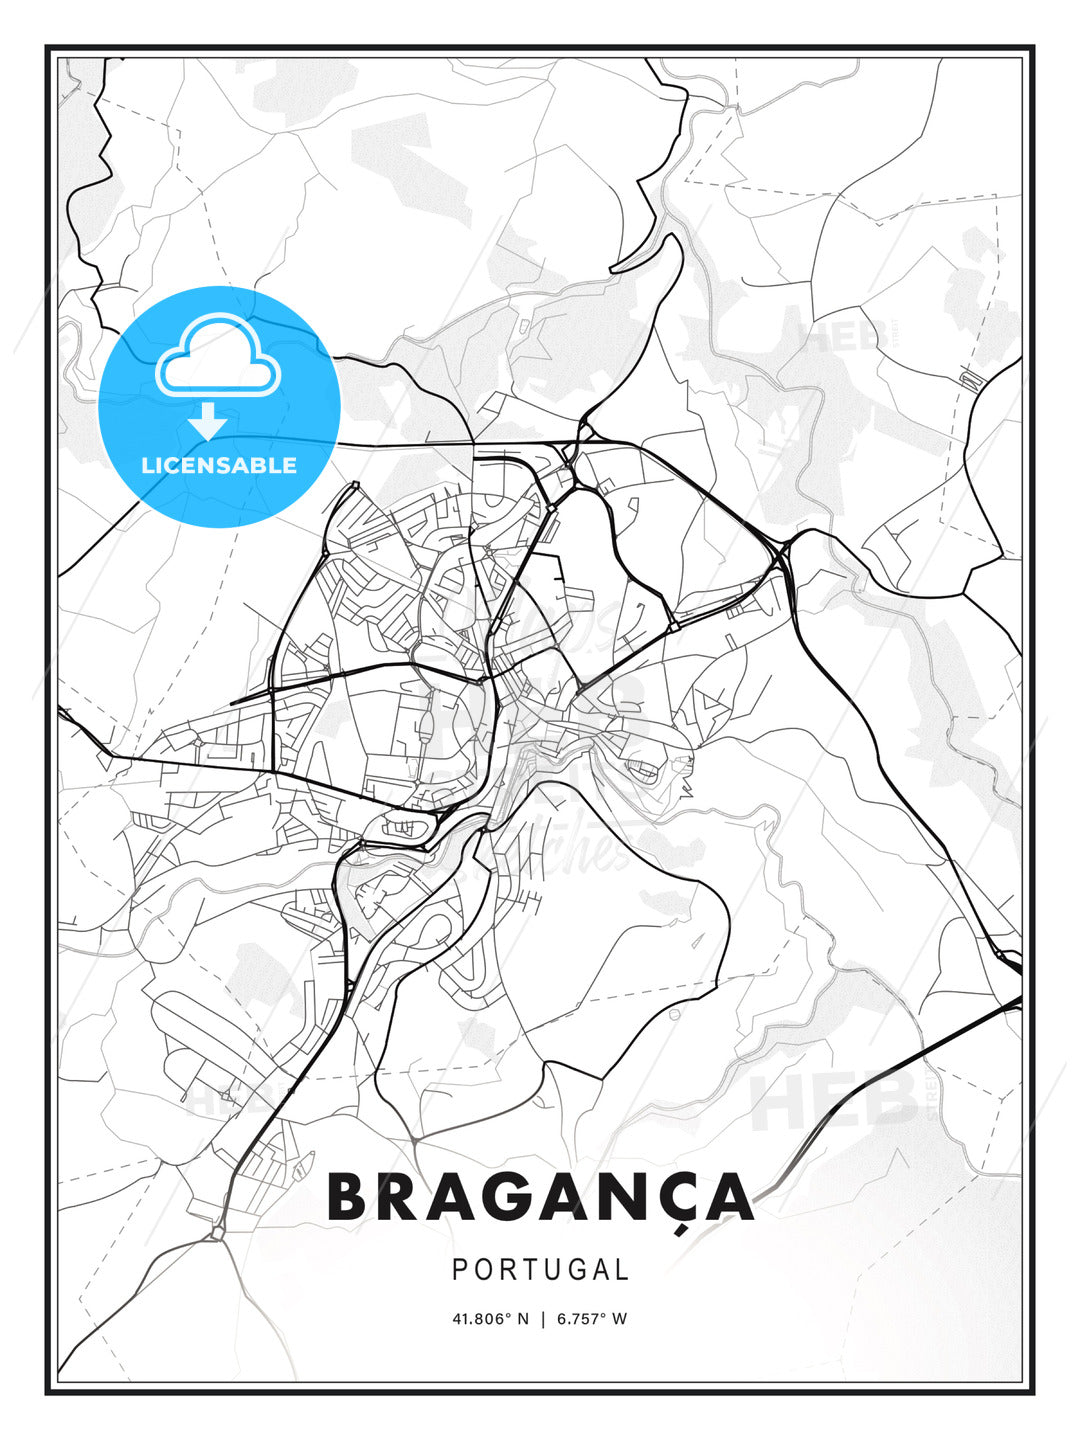 Bragança, Portugal, Modern Print Template in Various Formats - HEBSTREITS Sketches